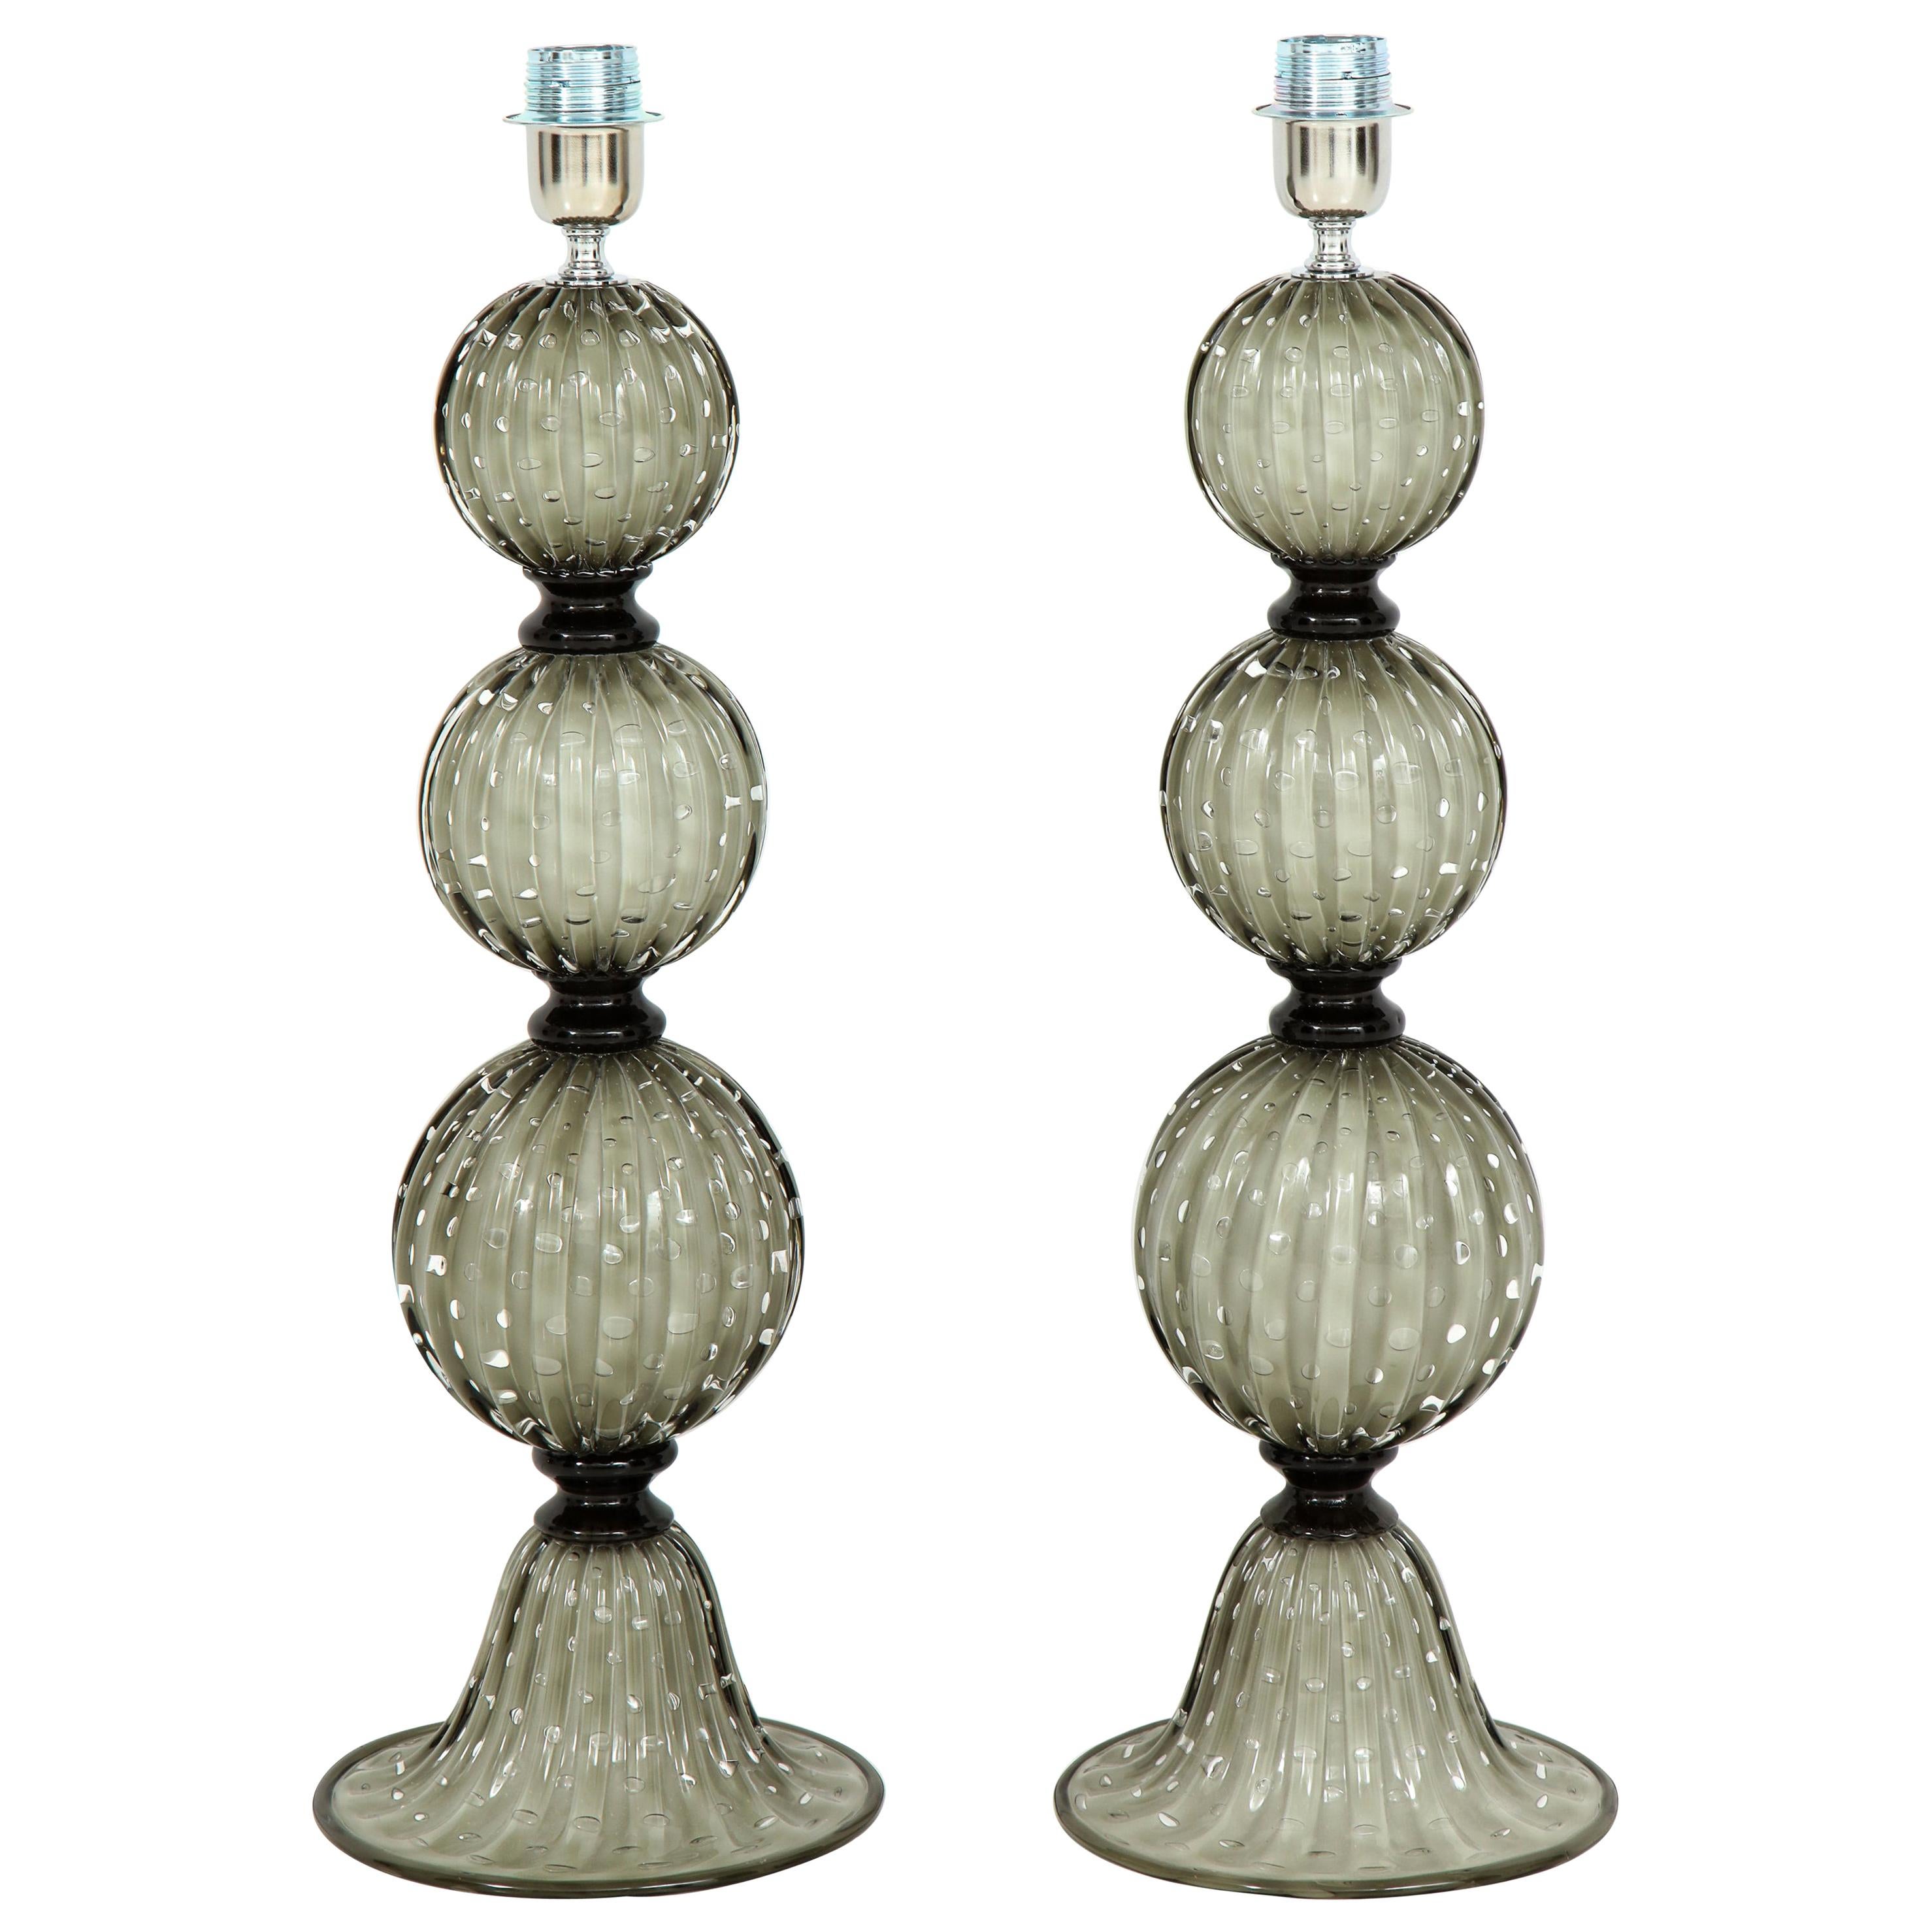 Pair of Grey with Ivory Undertone Murano Glass Lamps, Italy, Signed